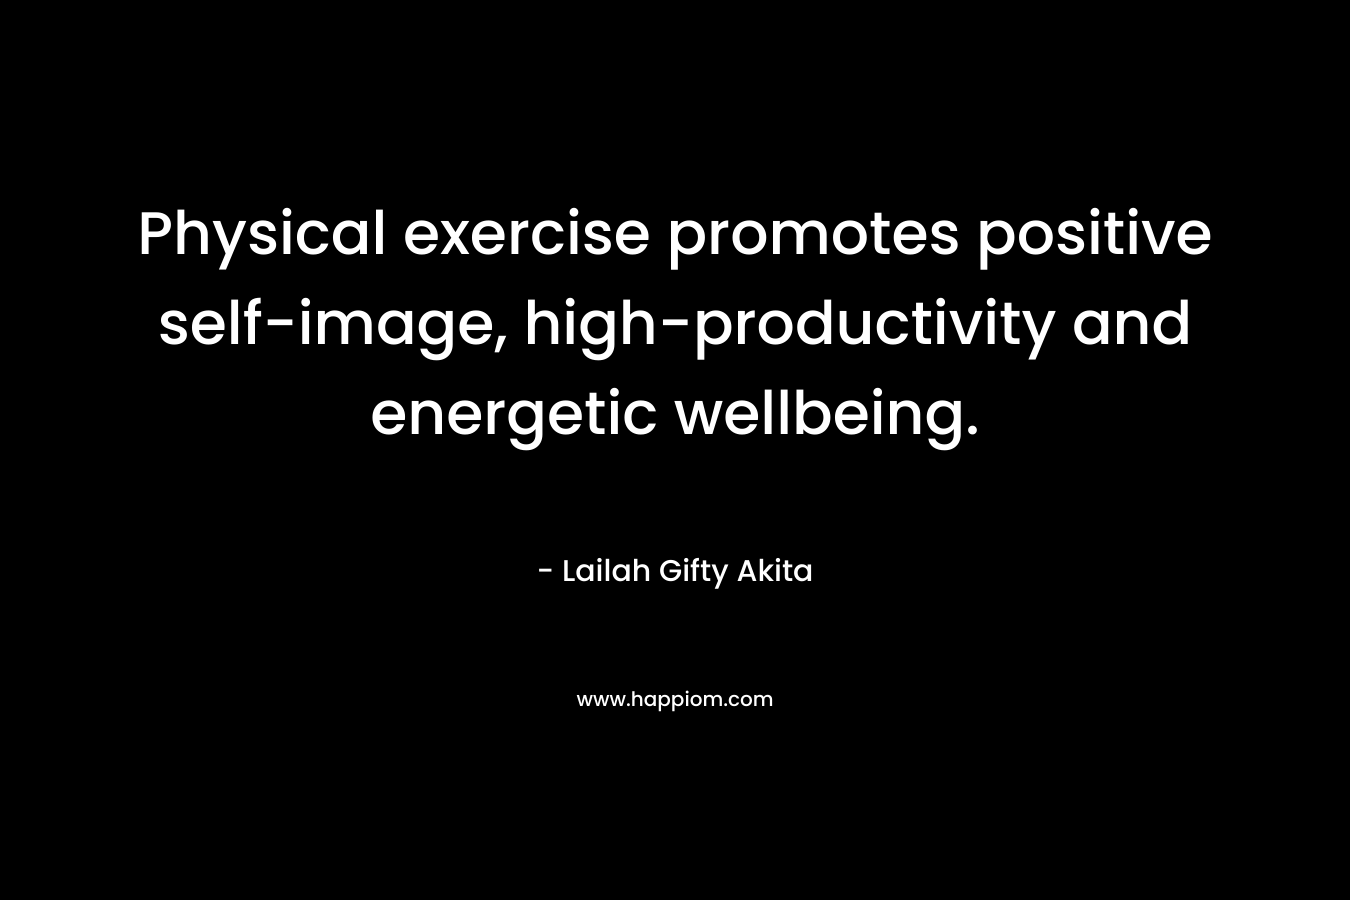 Physical exercise promotes positive self-image, high-productivity and energetic wellbeing. – Lailah Gifty Akita